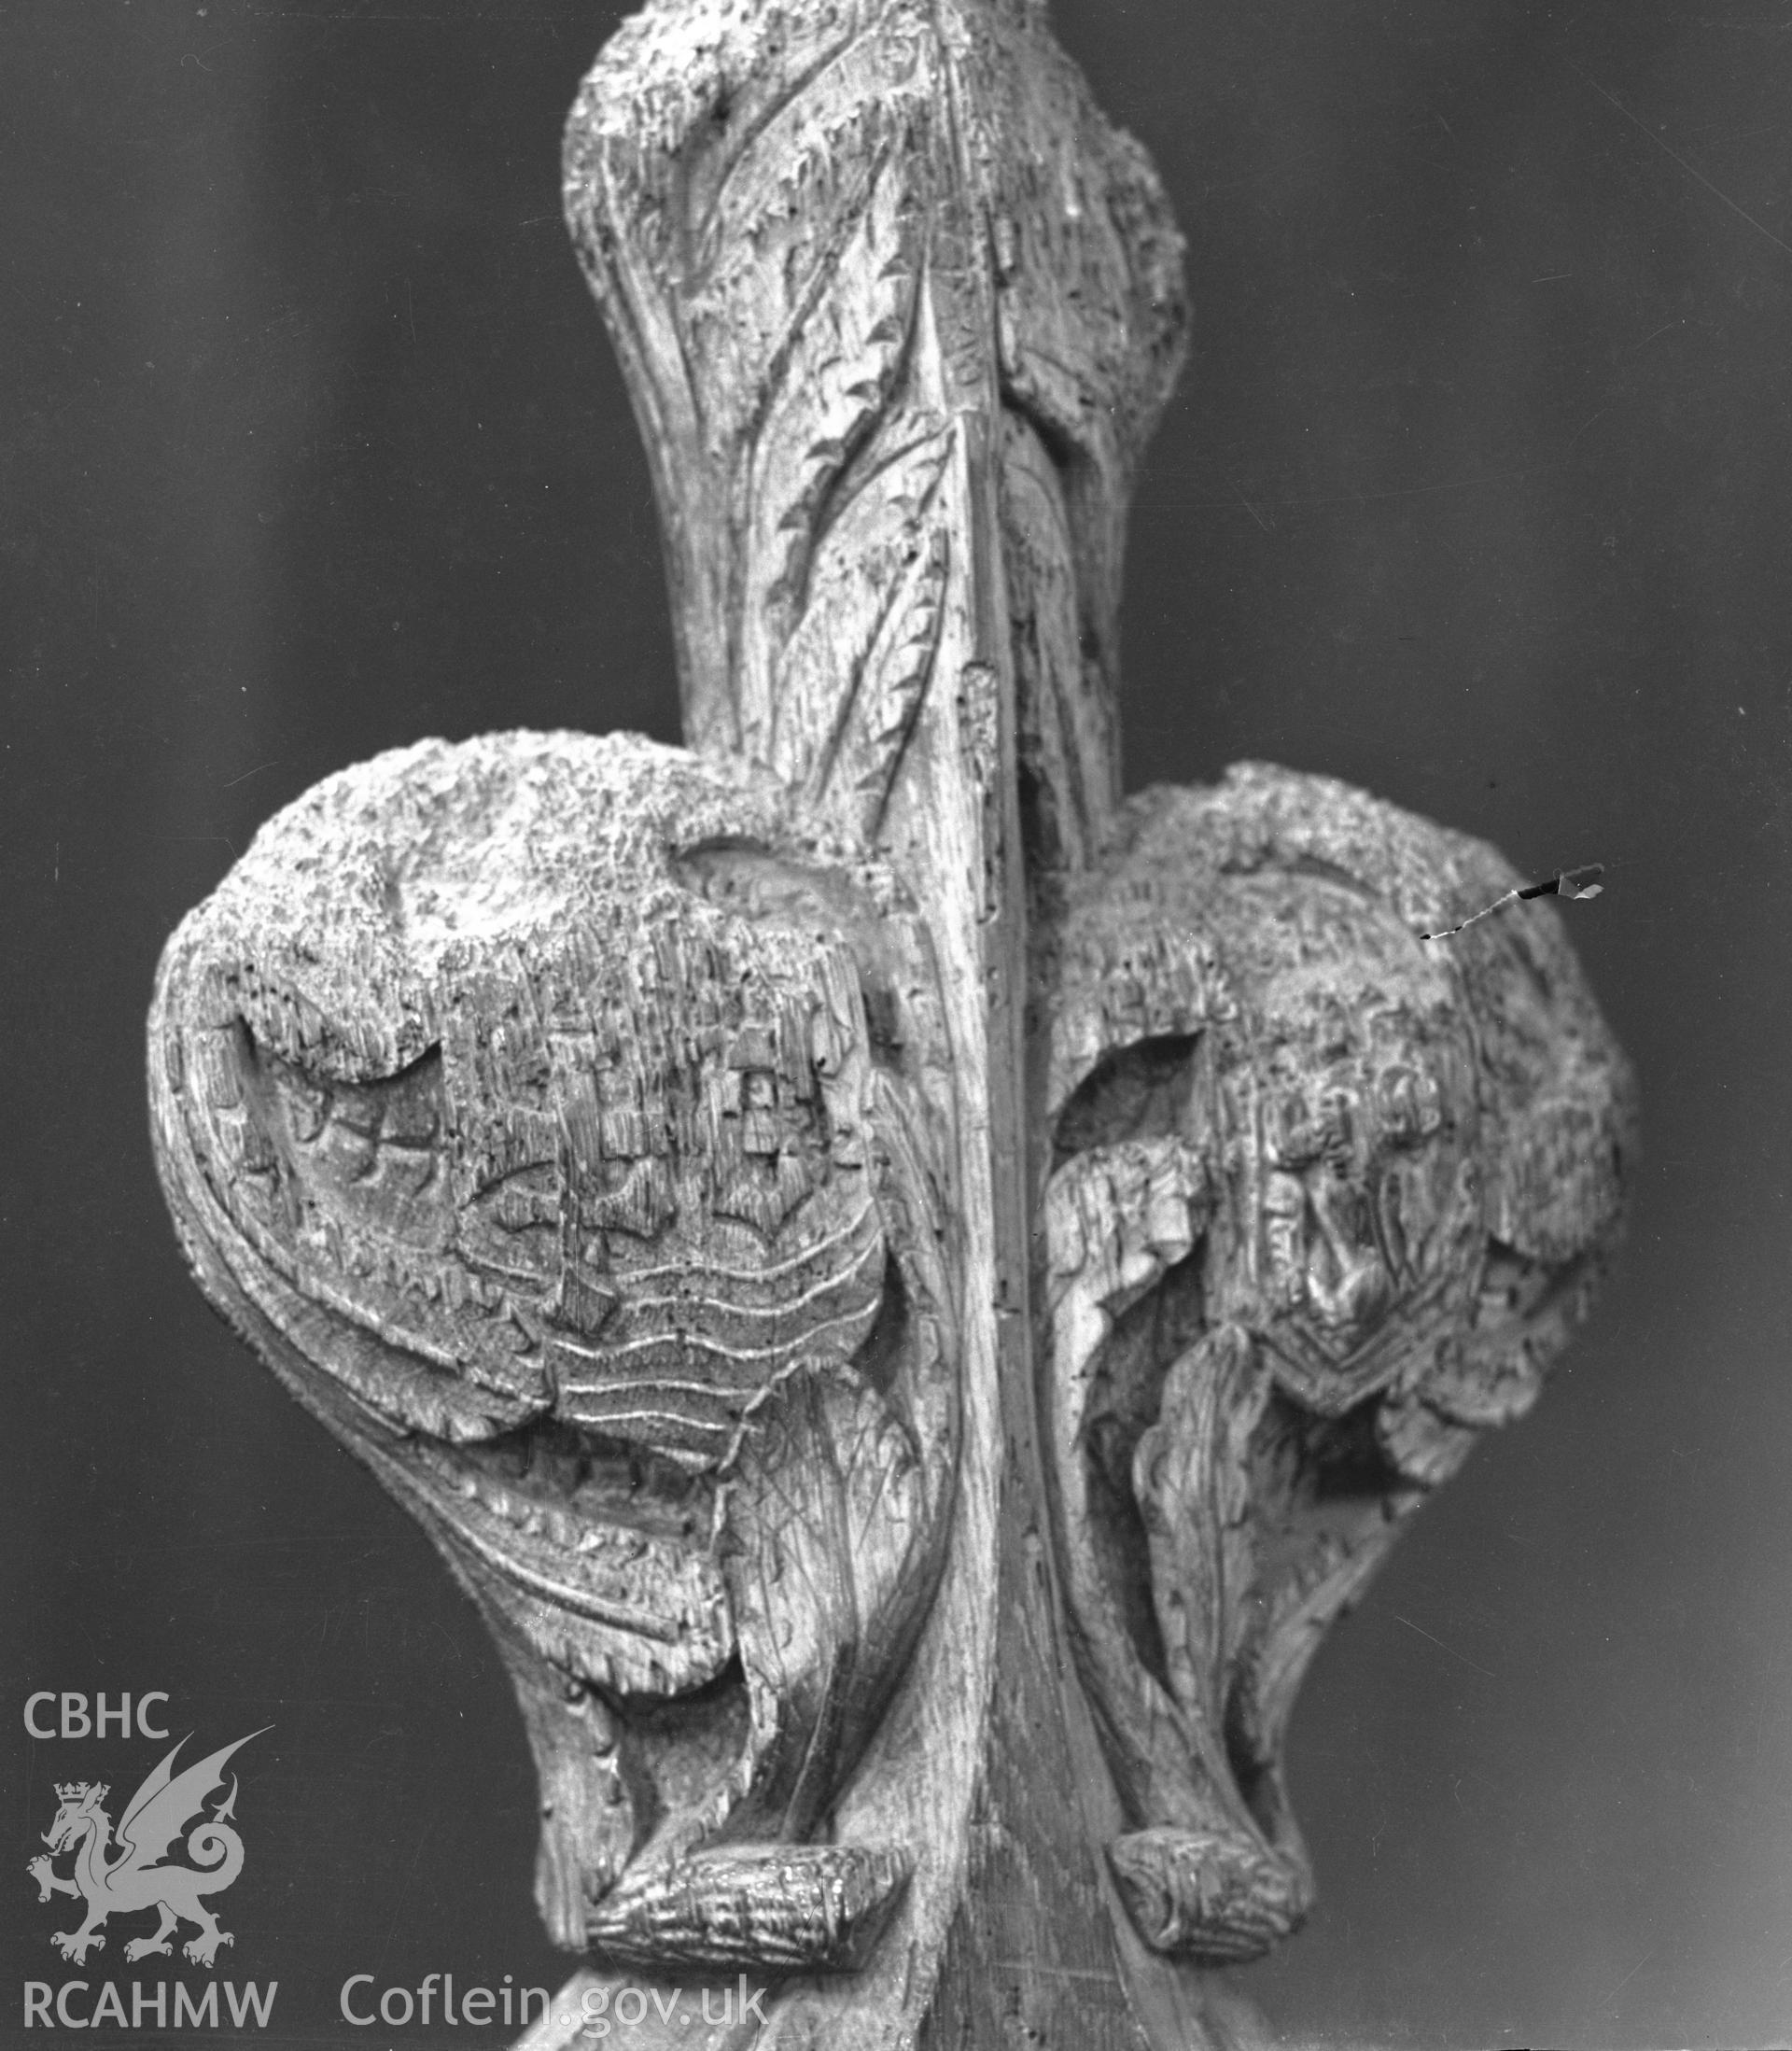 Digital copy of a black and white acetate negative showing detail of poppyhead in St. David's Cathedral, taken by E.W. Lovegrove, July 1936